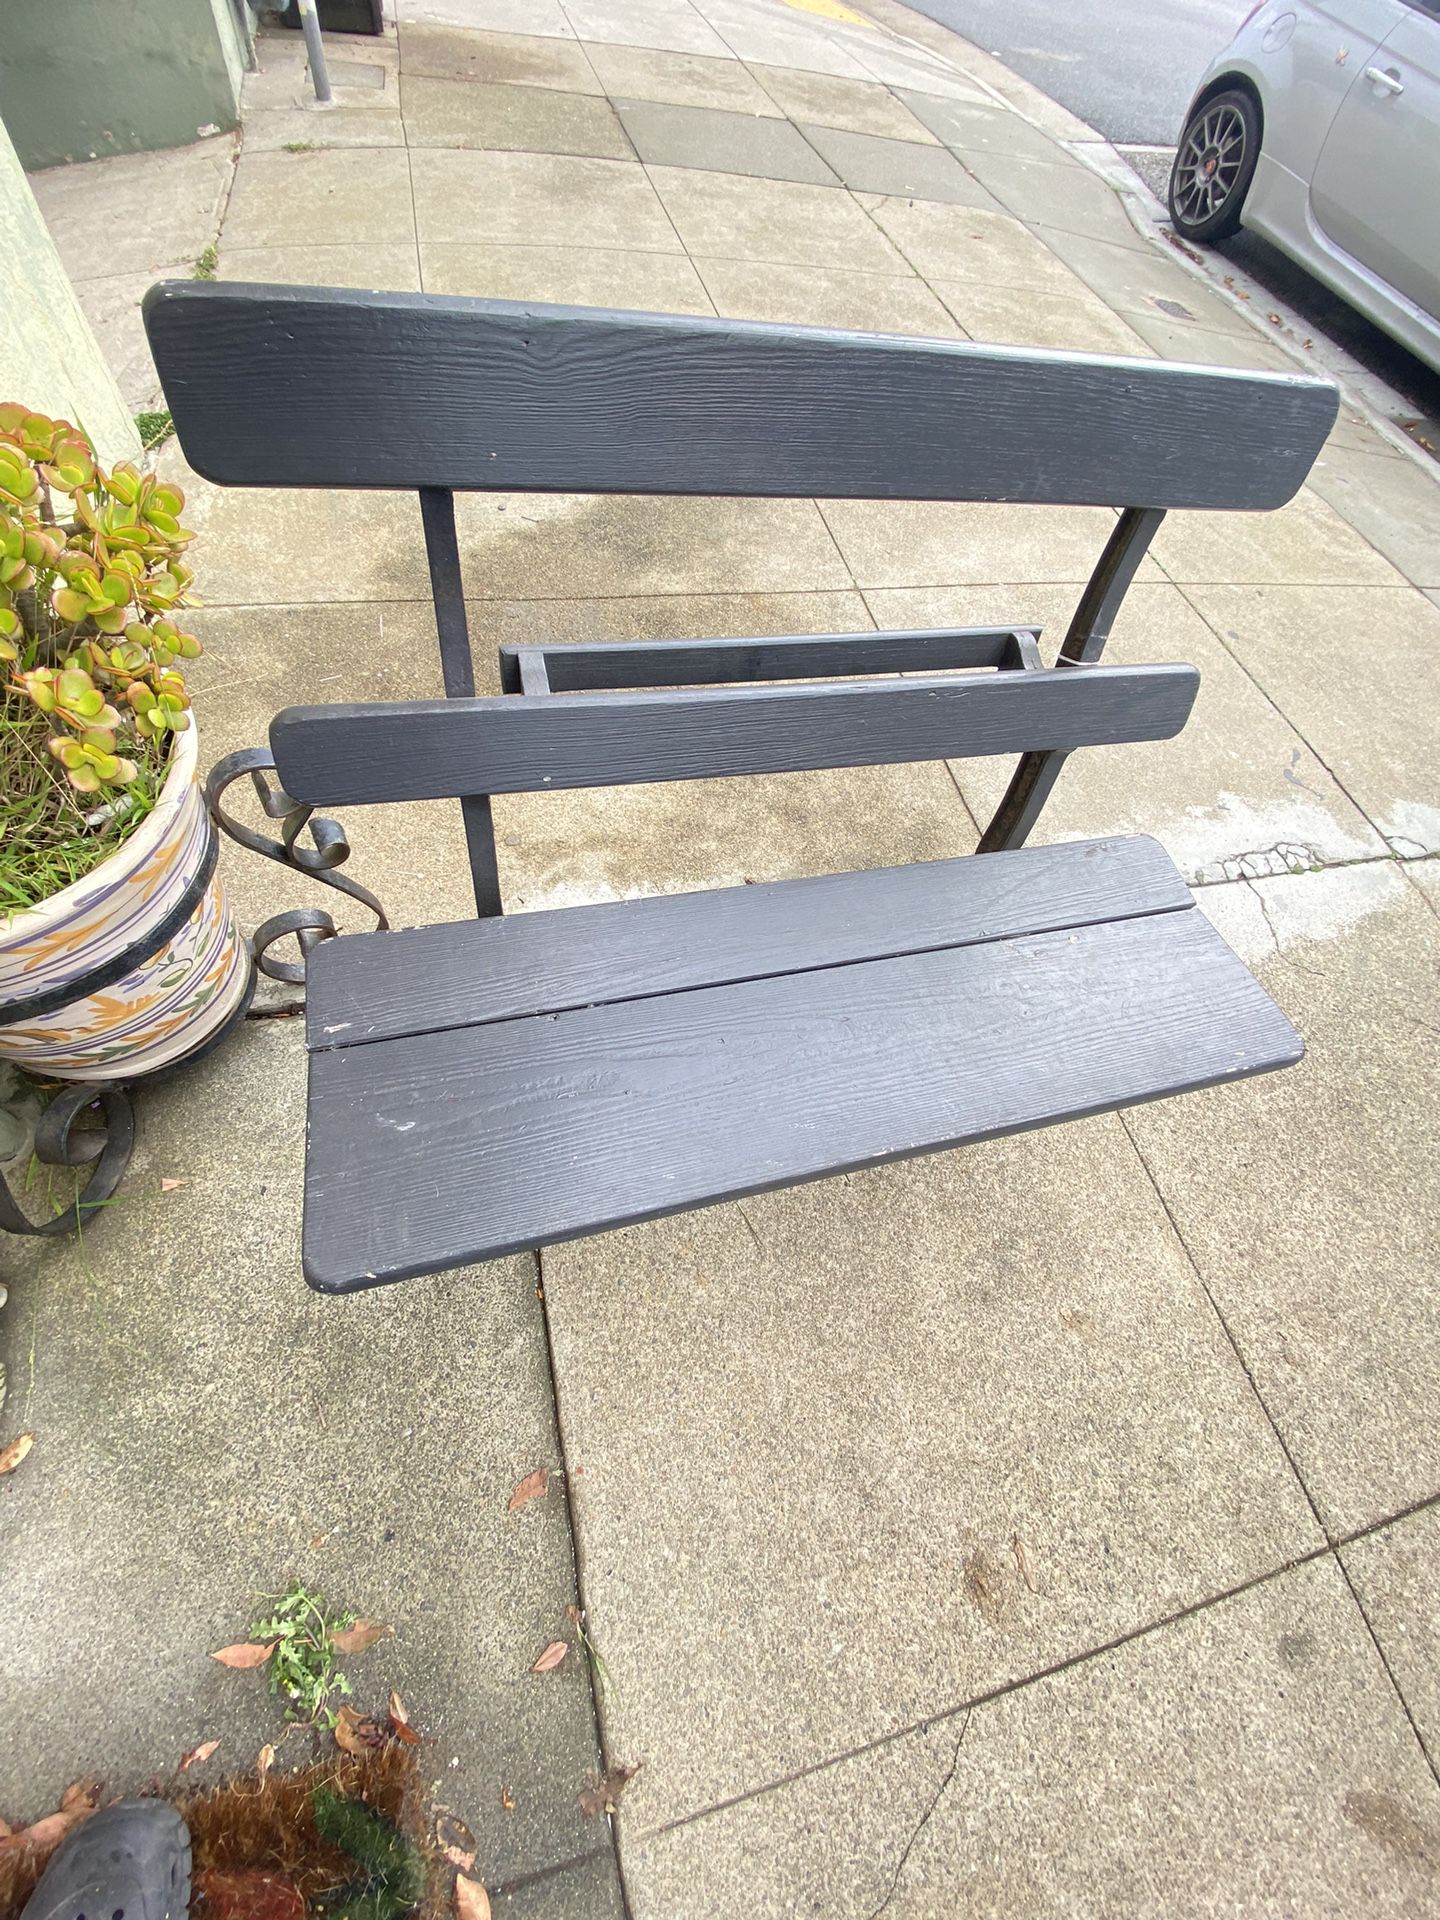  Wooden Metal Bench For Sale $350